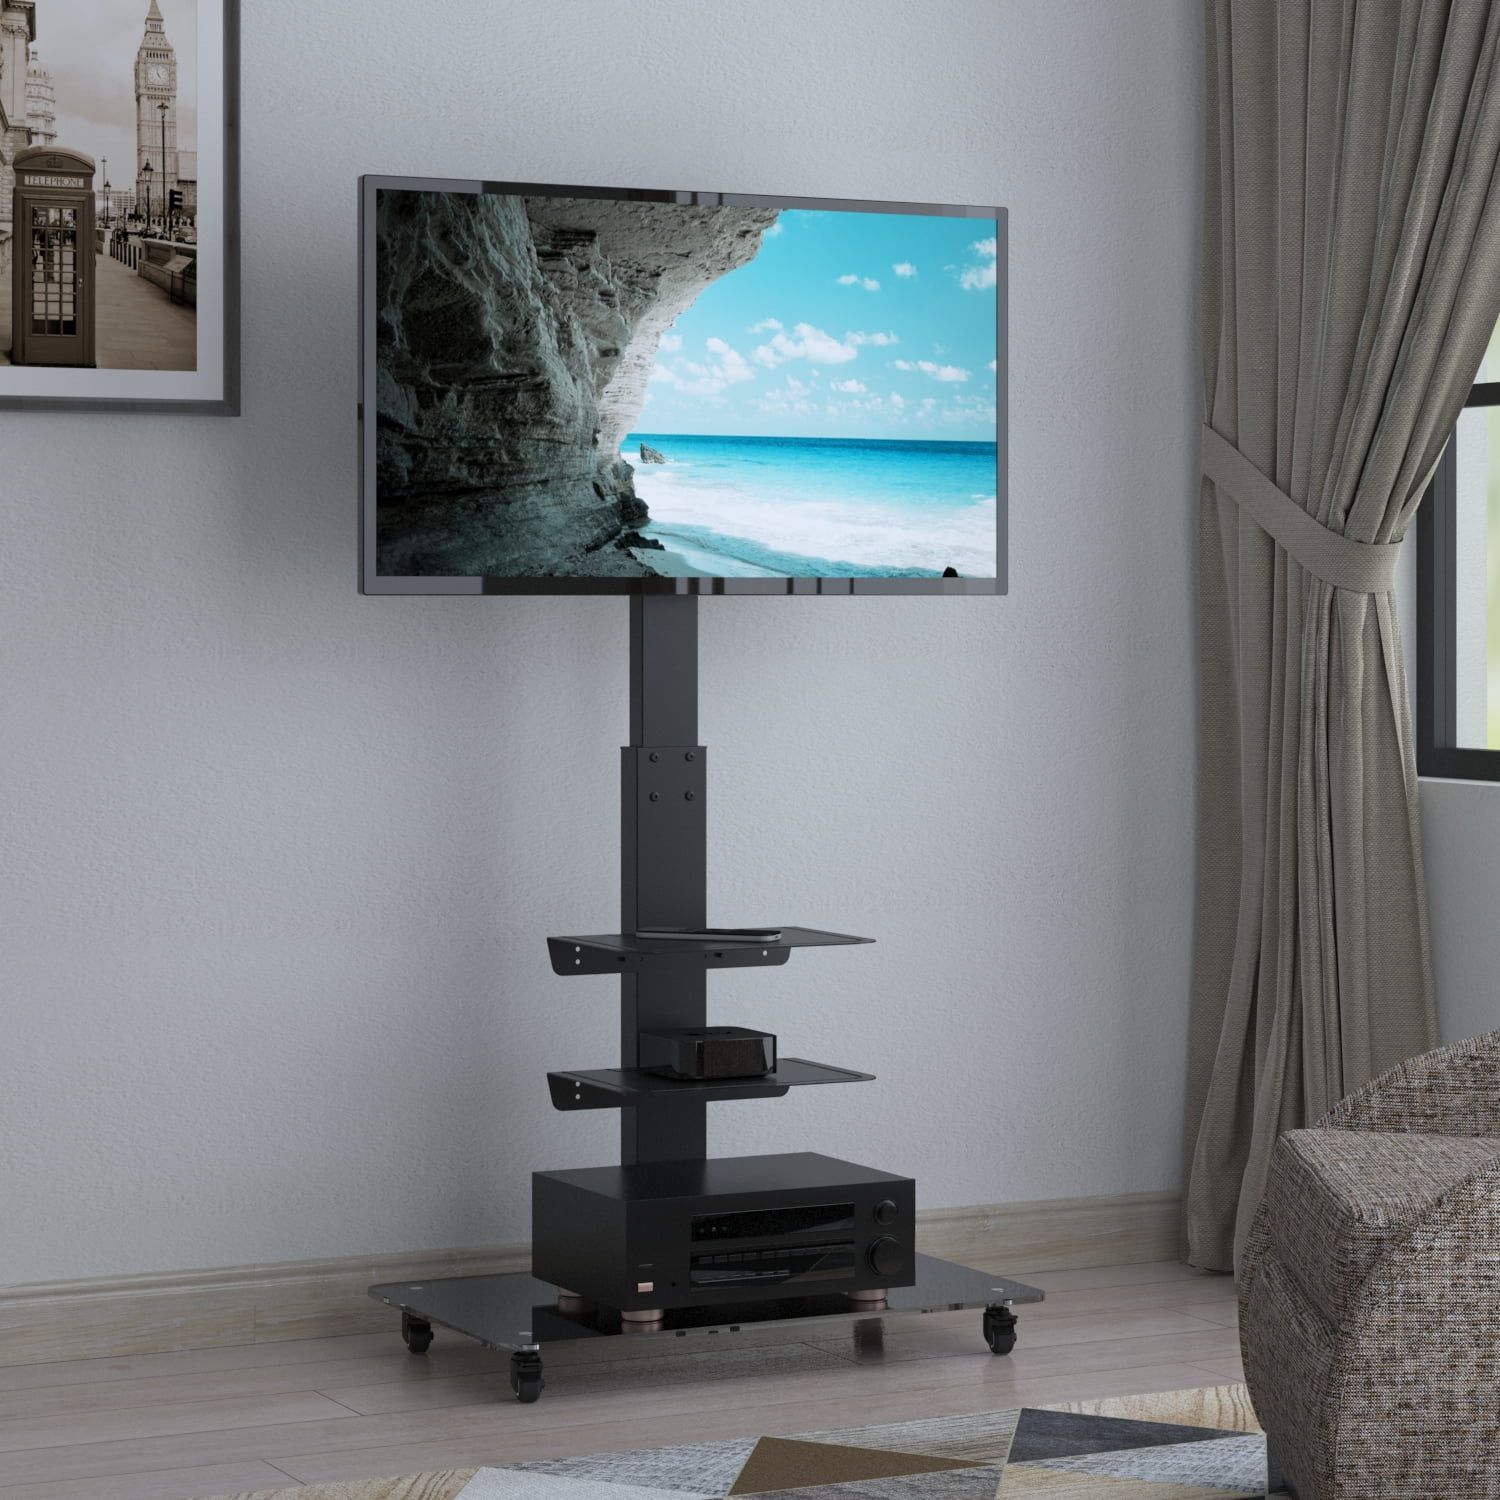 Yomt Modern Rolling Floor Tv Stand For 32 To 65 Inch India | Ubuy Within Modern Rolling Tv Stands (View 7 of 15)